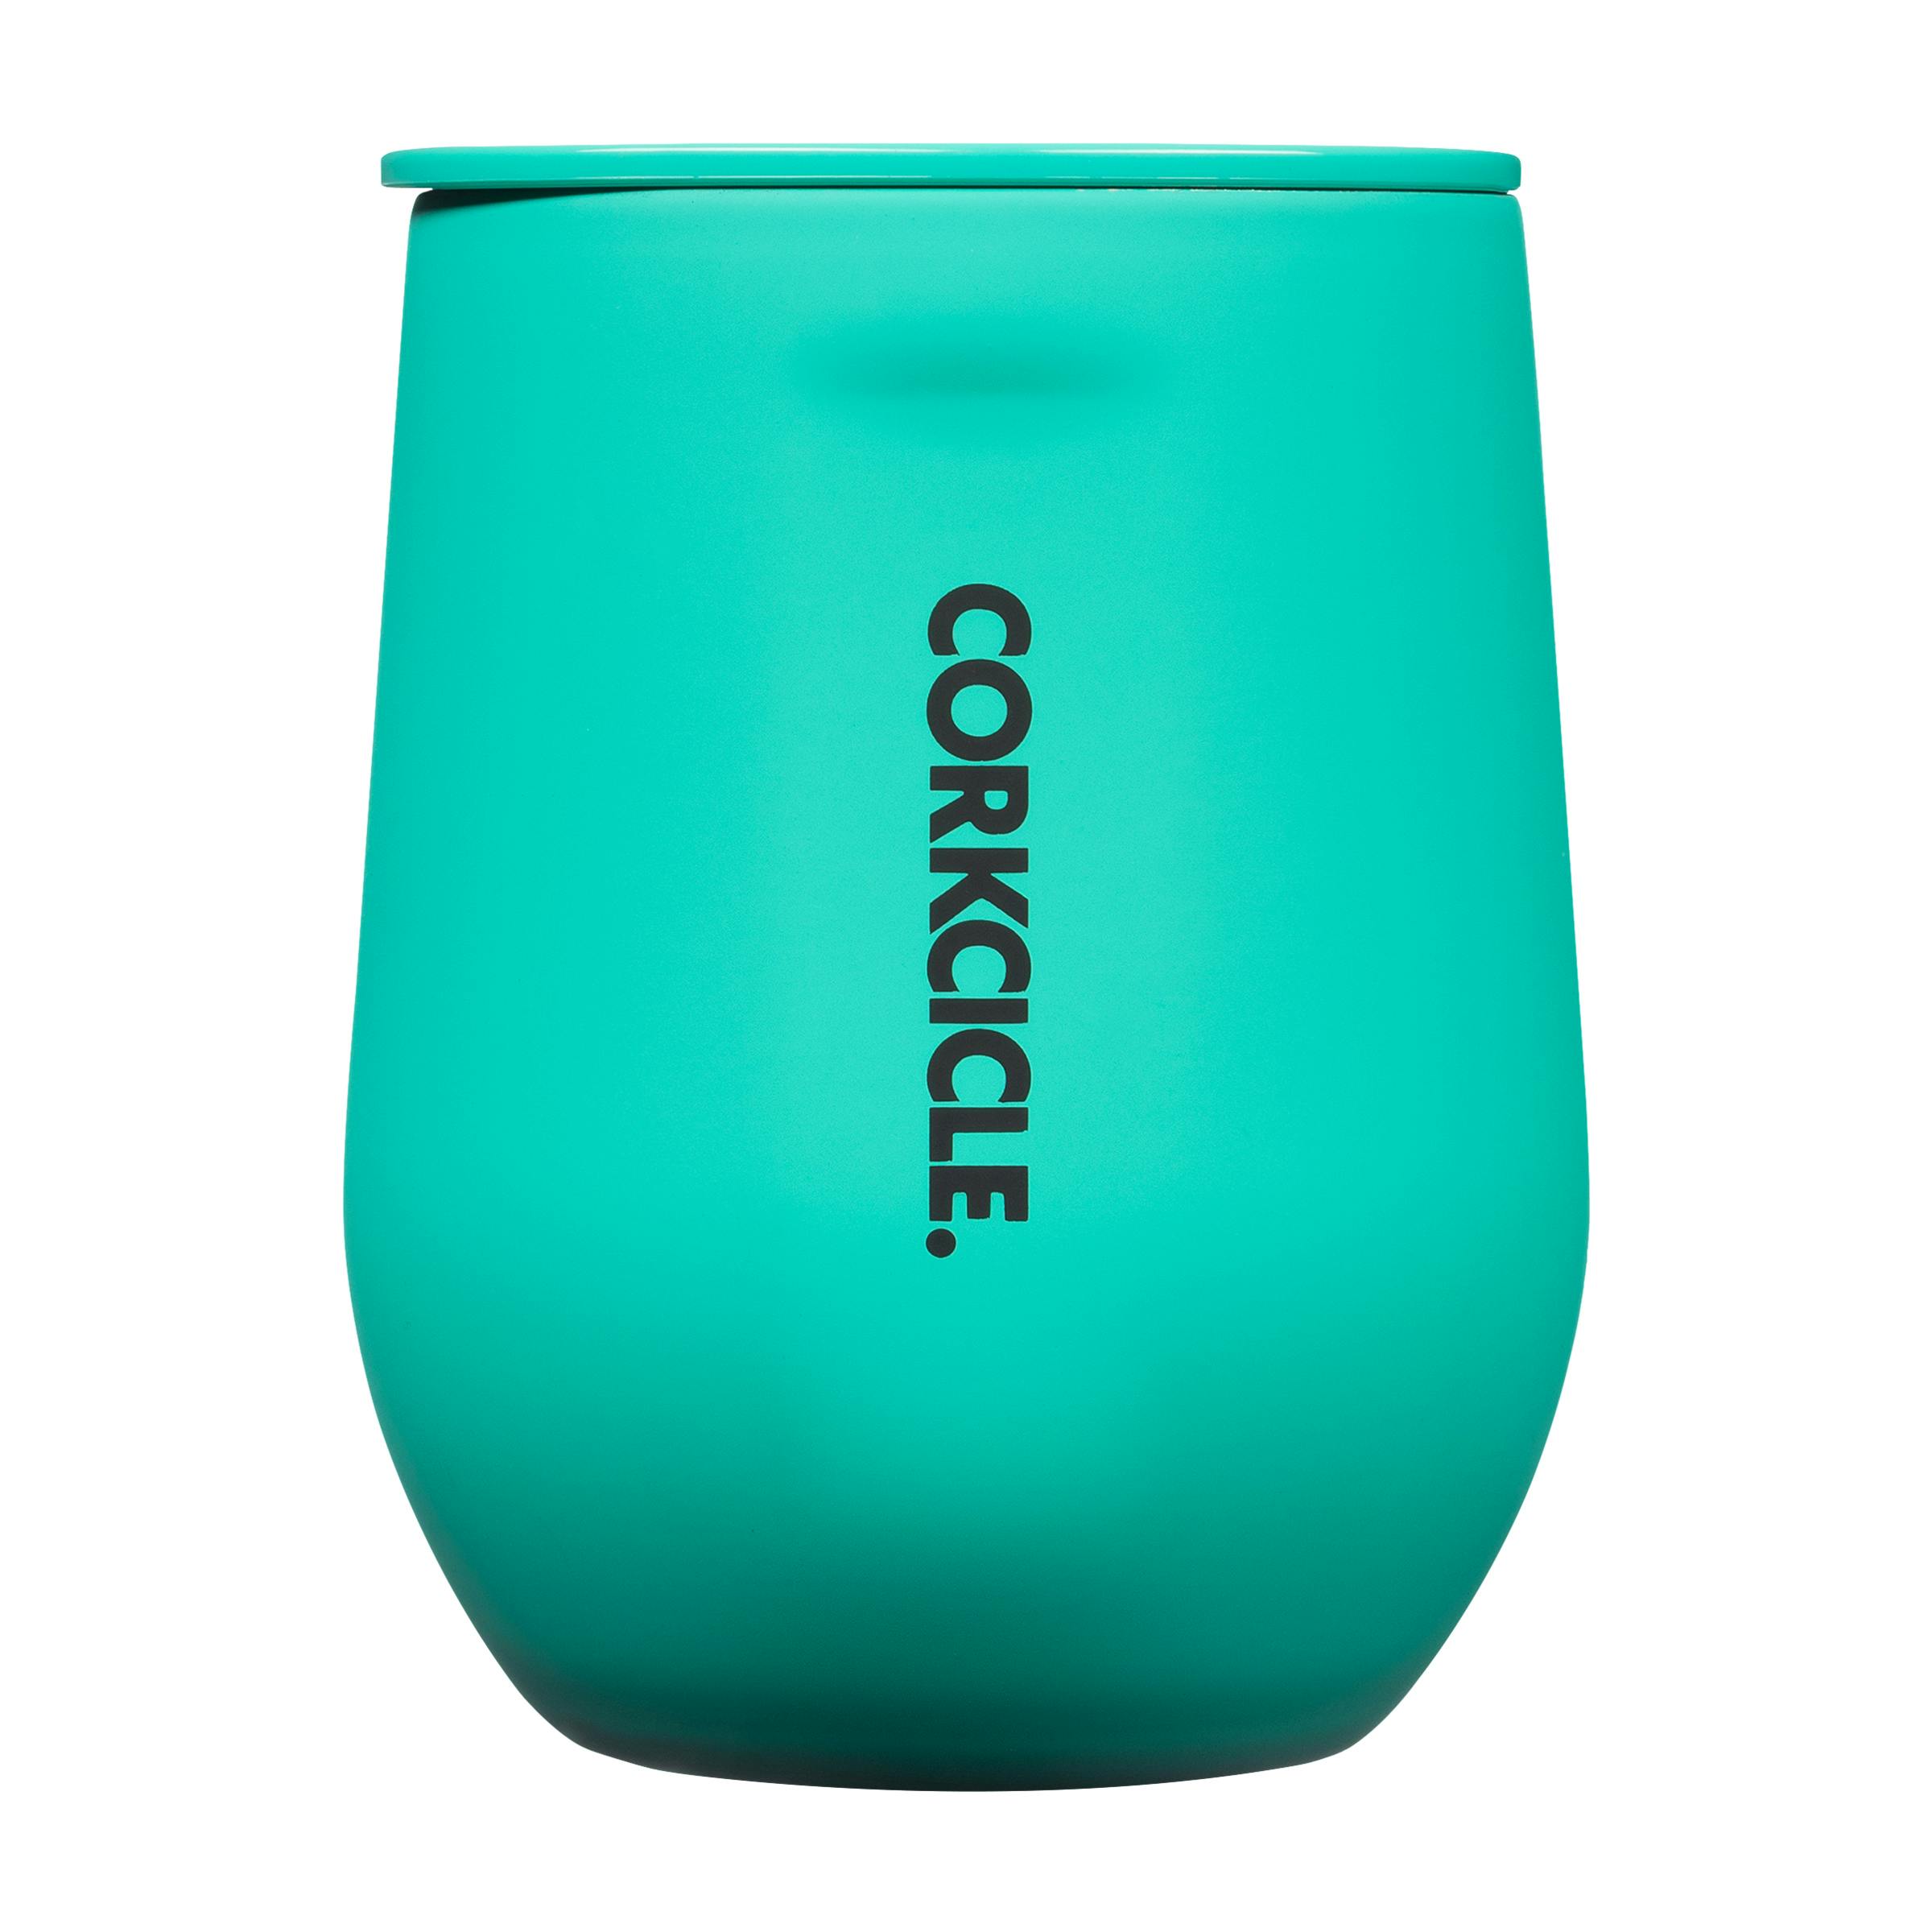 Corkcicle Prosecco Stainless Steel Stemless Wine Glass Cup, 12 oz